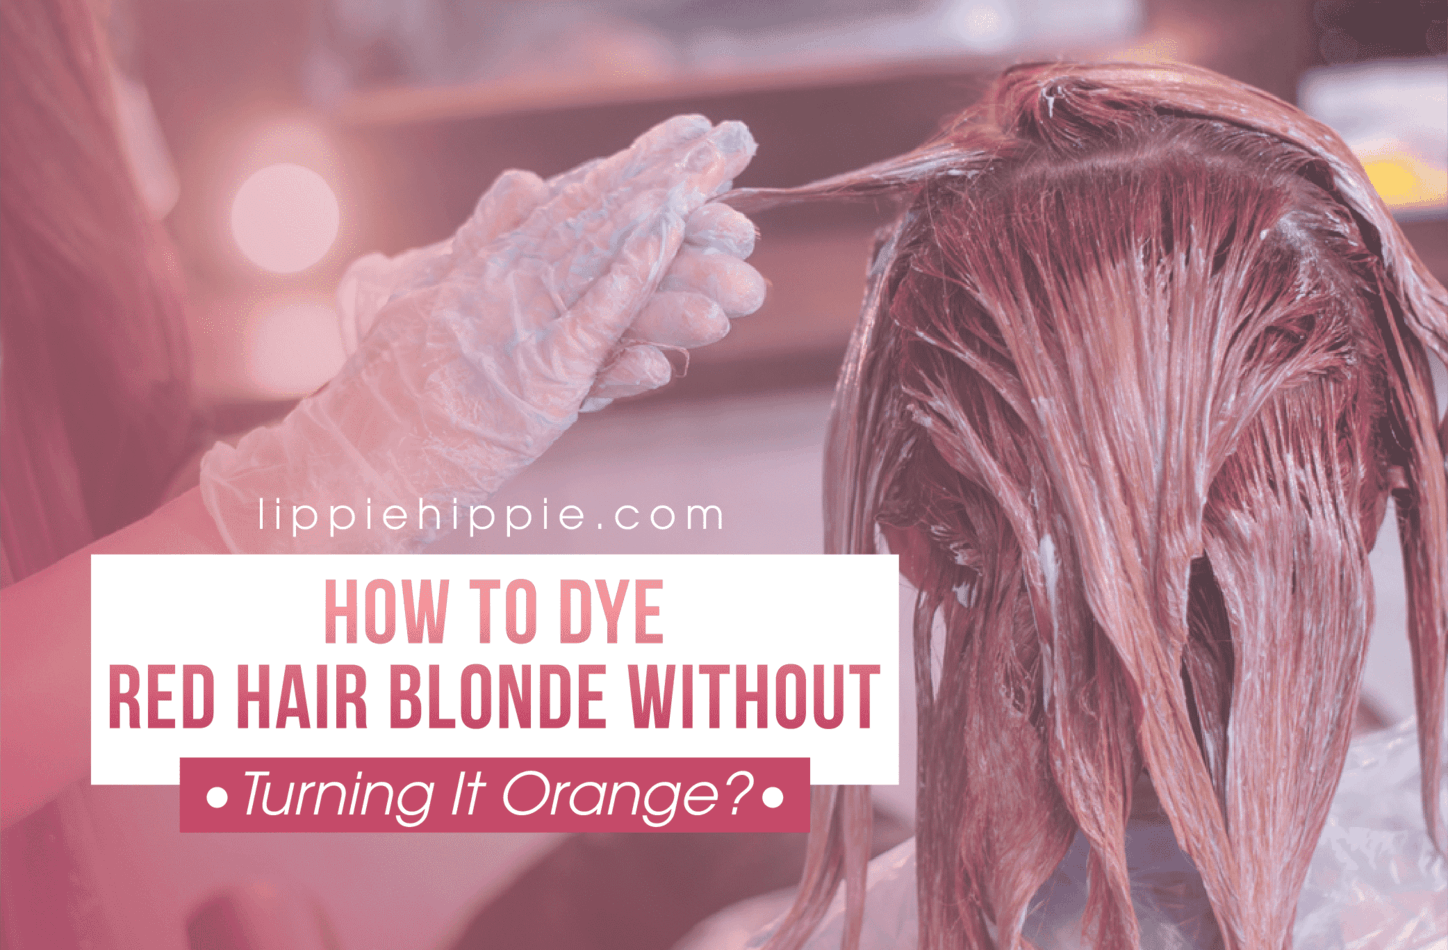 8. How to Dye Your Hair Blonde at Home Without Turning Orange - wide 7